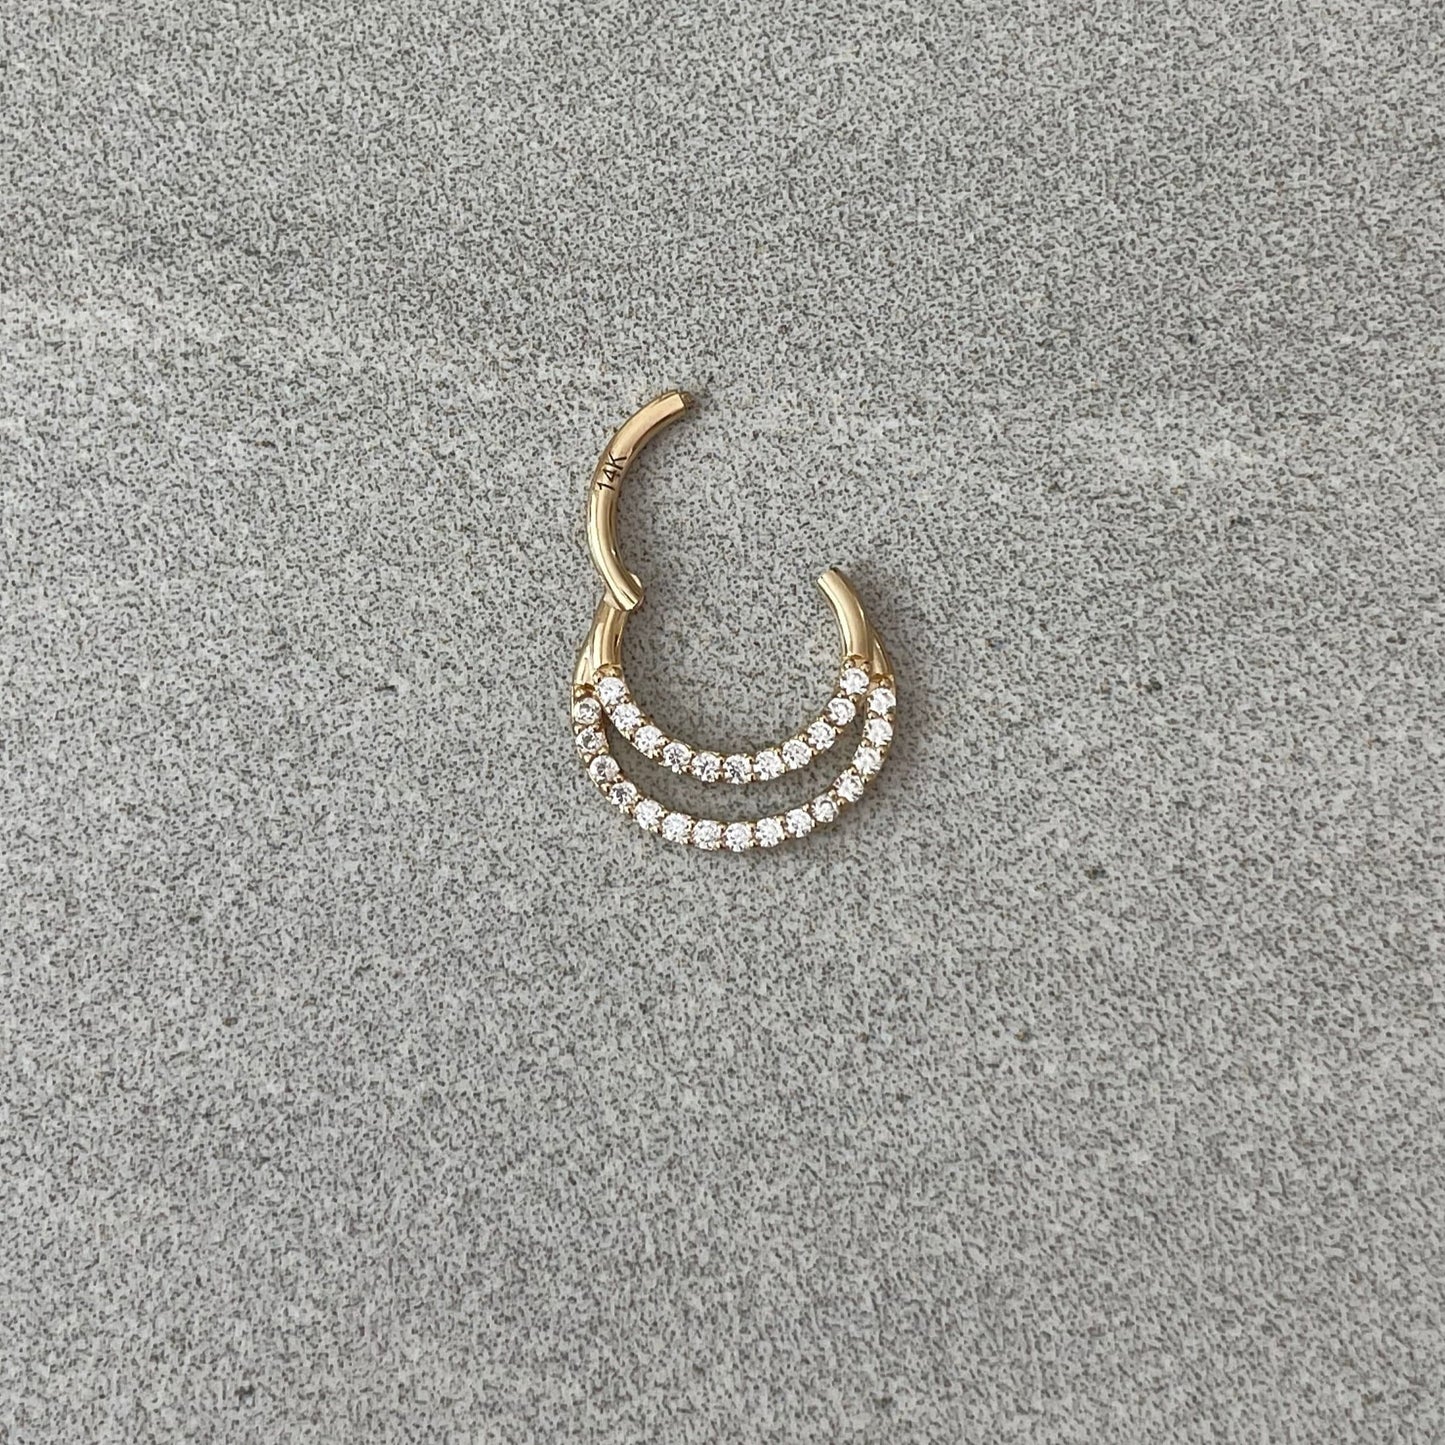 Solid Gold Double Hoop Daith Earring (16G | 6mm, 8mm, or 10mm | 14k Solid Gold | White or Yellow Gold)